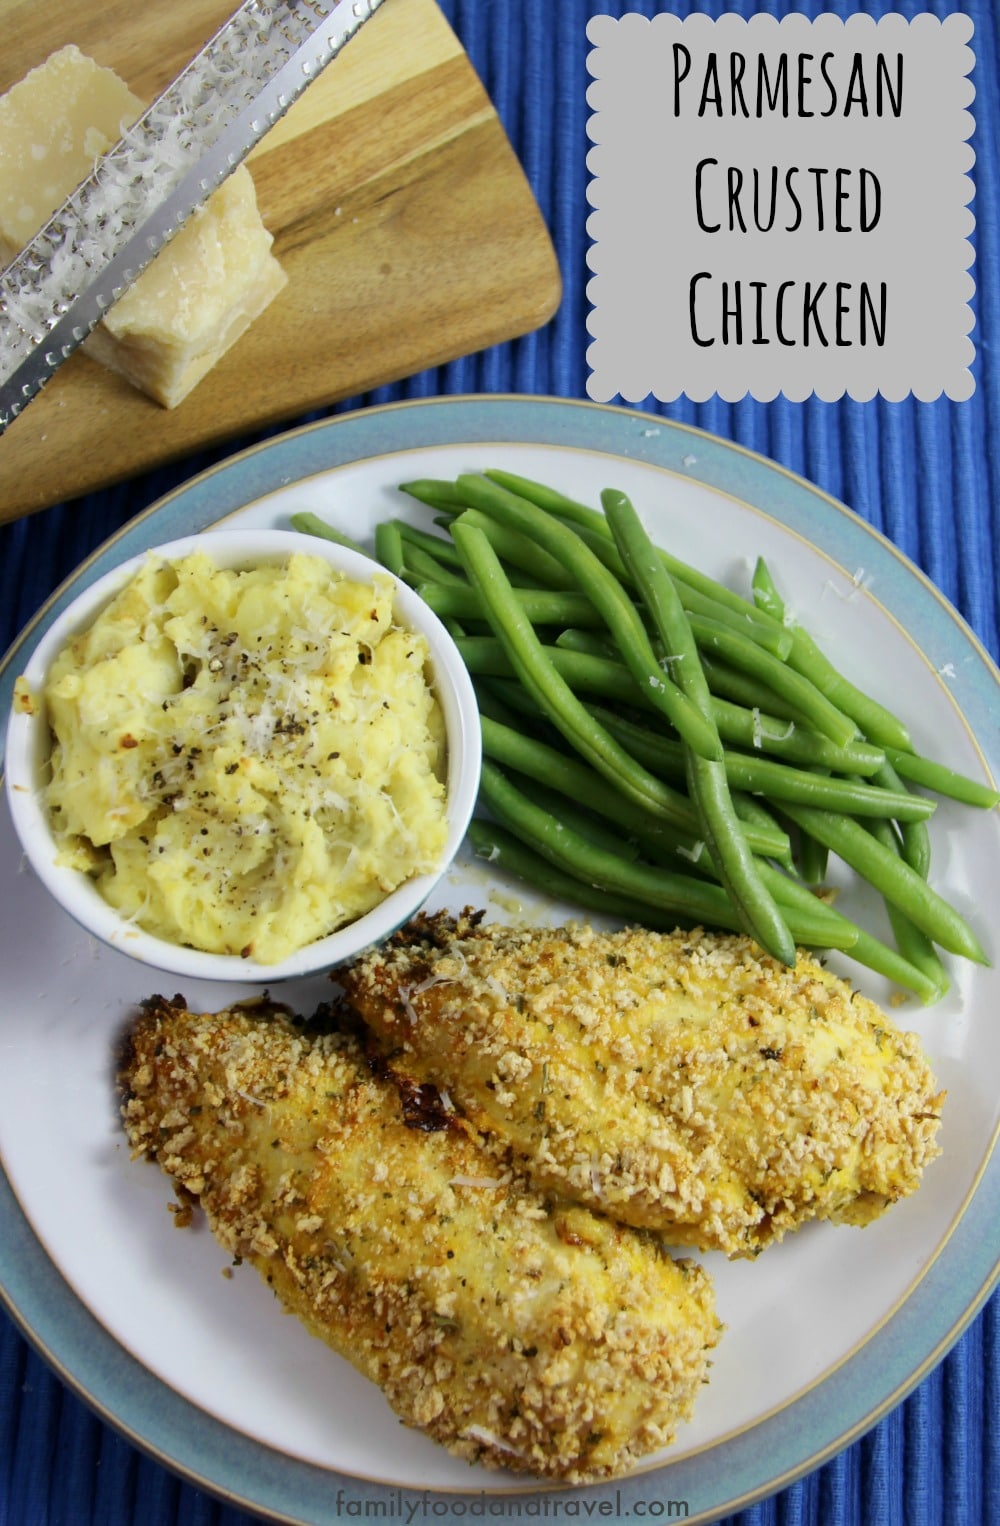 Parmesan Crusted Chicken - gluten free, moist and delicious baked chicken perfect for weeknight dinners